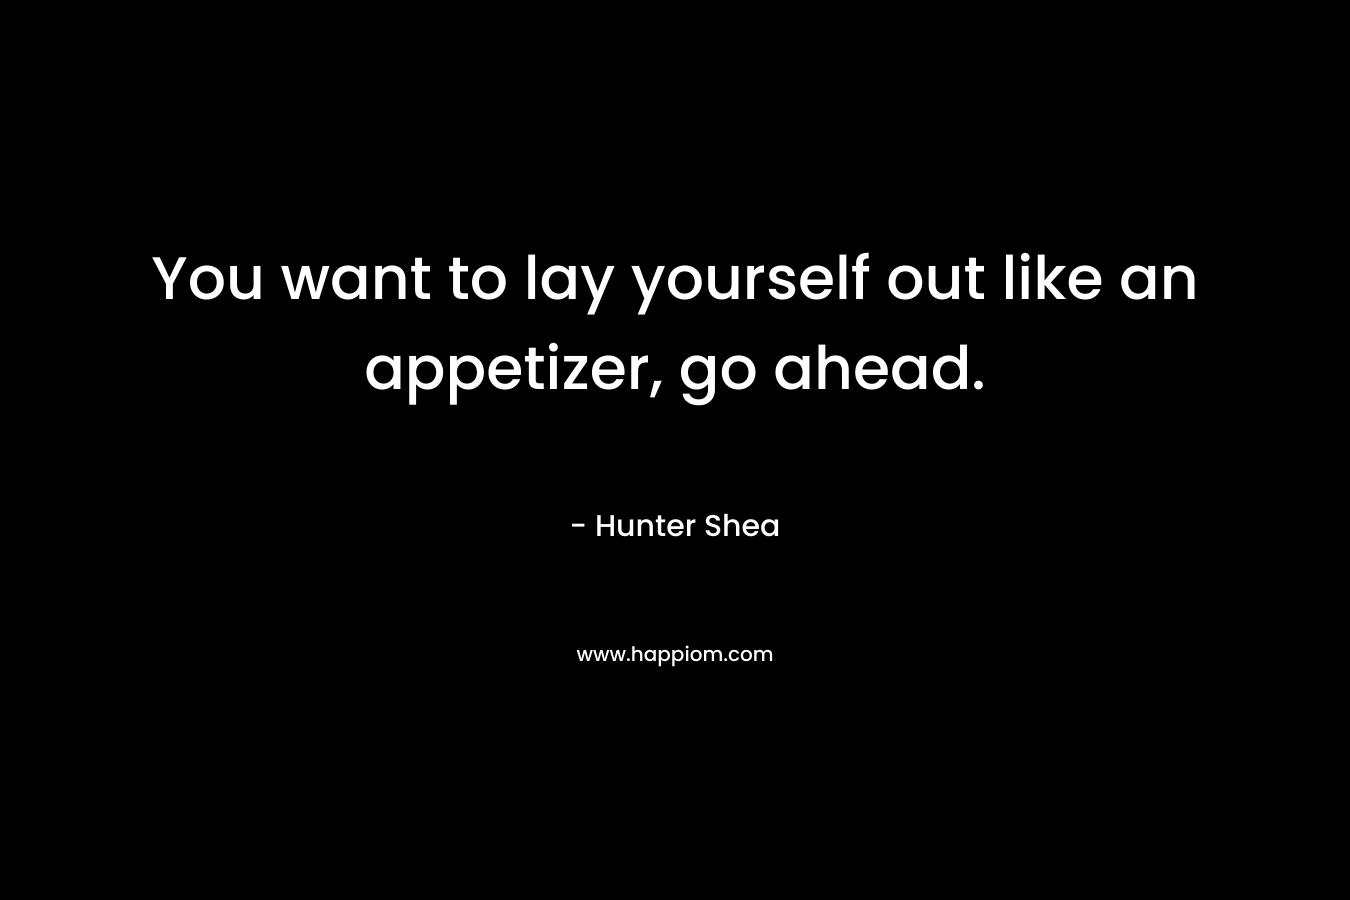 You want to lay yourself out like an appetizer, go ahead. – Hunter Shea